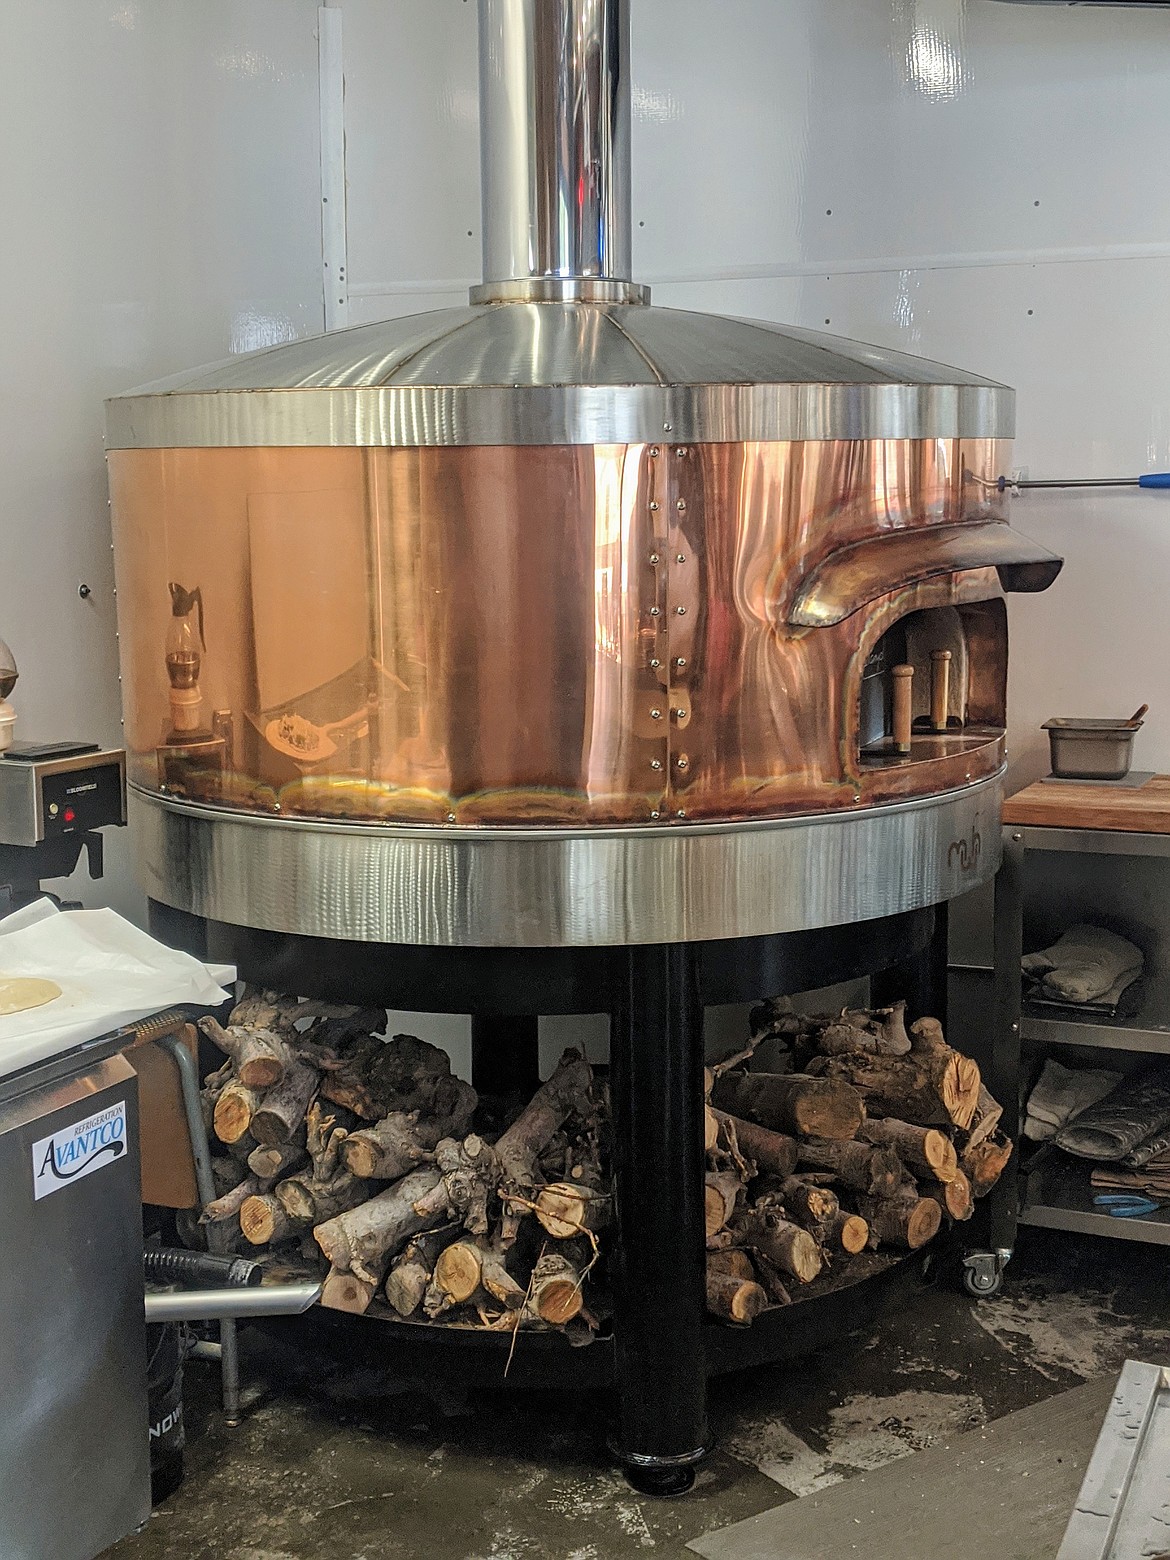 Photo by CHANSE WATSON
From the bar, one can see the exposed kitchen and wood fire pizza oven that truly is a work of art. Borrowing the look of an old fashioned copper still, this unique piece of kitchen machinery cooks pizzas around 750 degrees &#151; roughly 250 to 150 degrees hotter than normal pizza ovens.